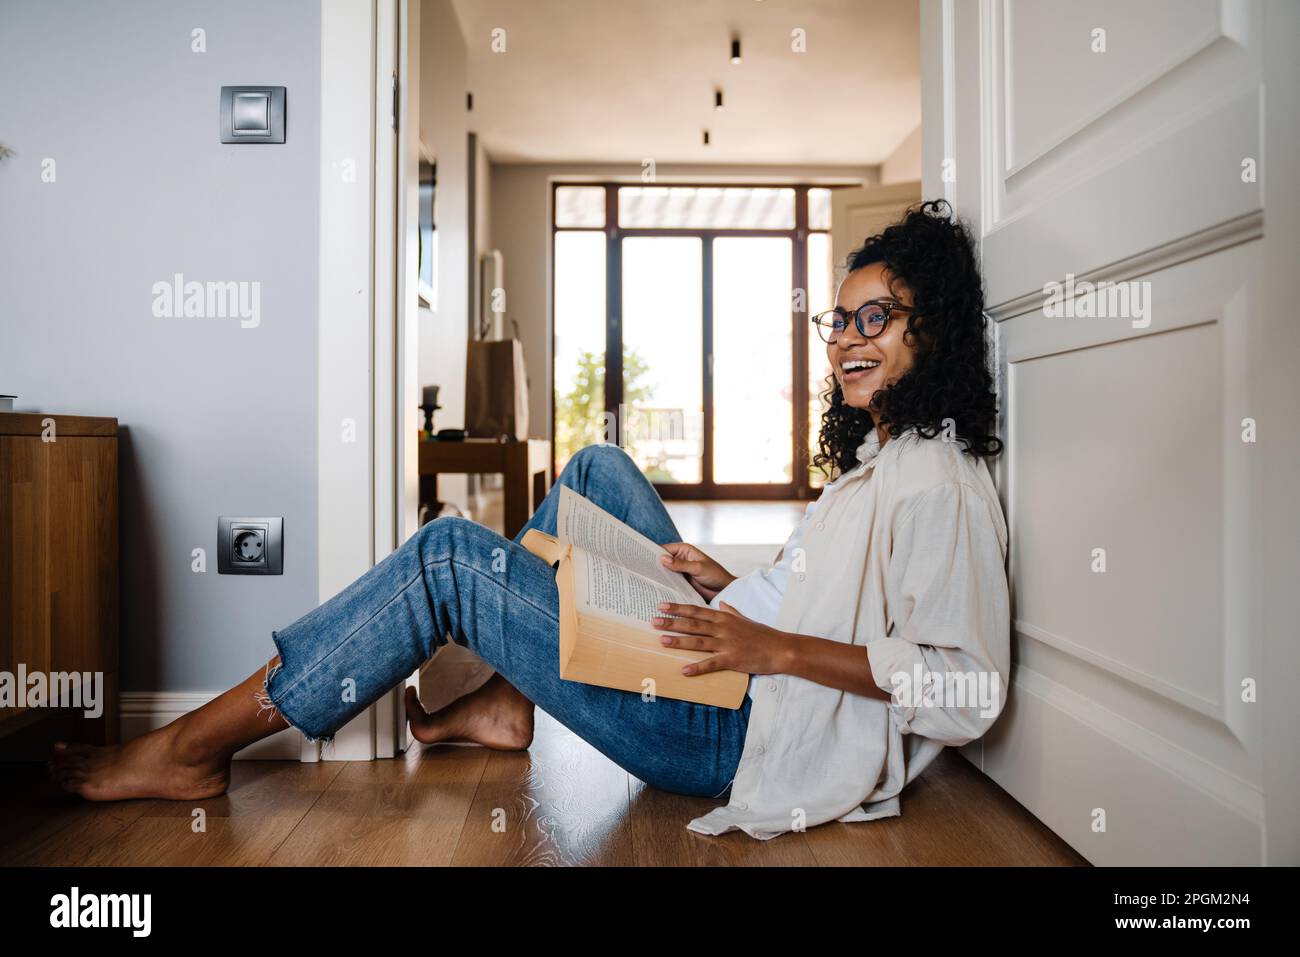 African american young woman with curly afro hairstyle sitting on floor at home and reading book Stock Photo